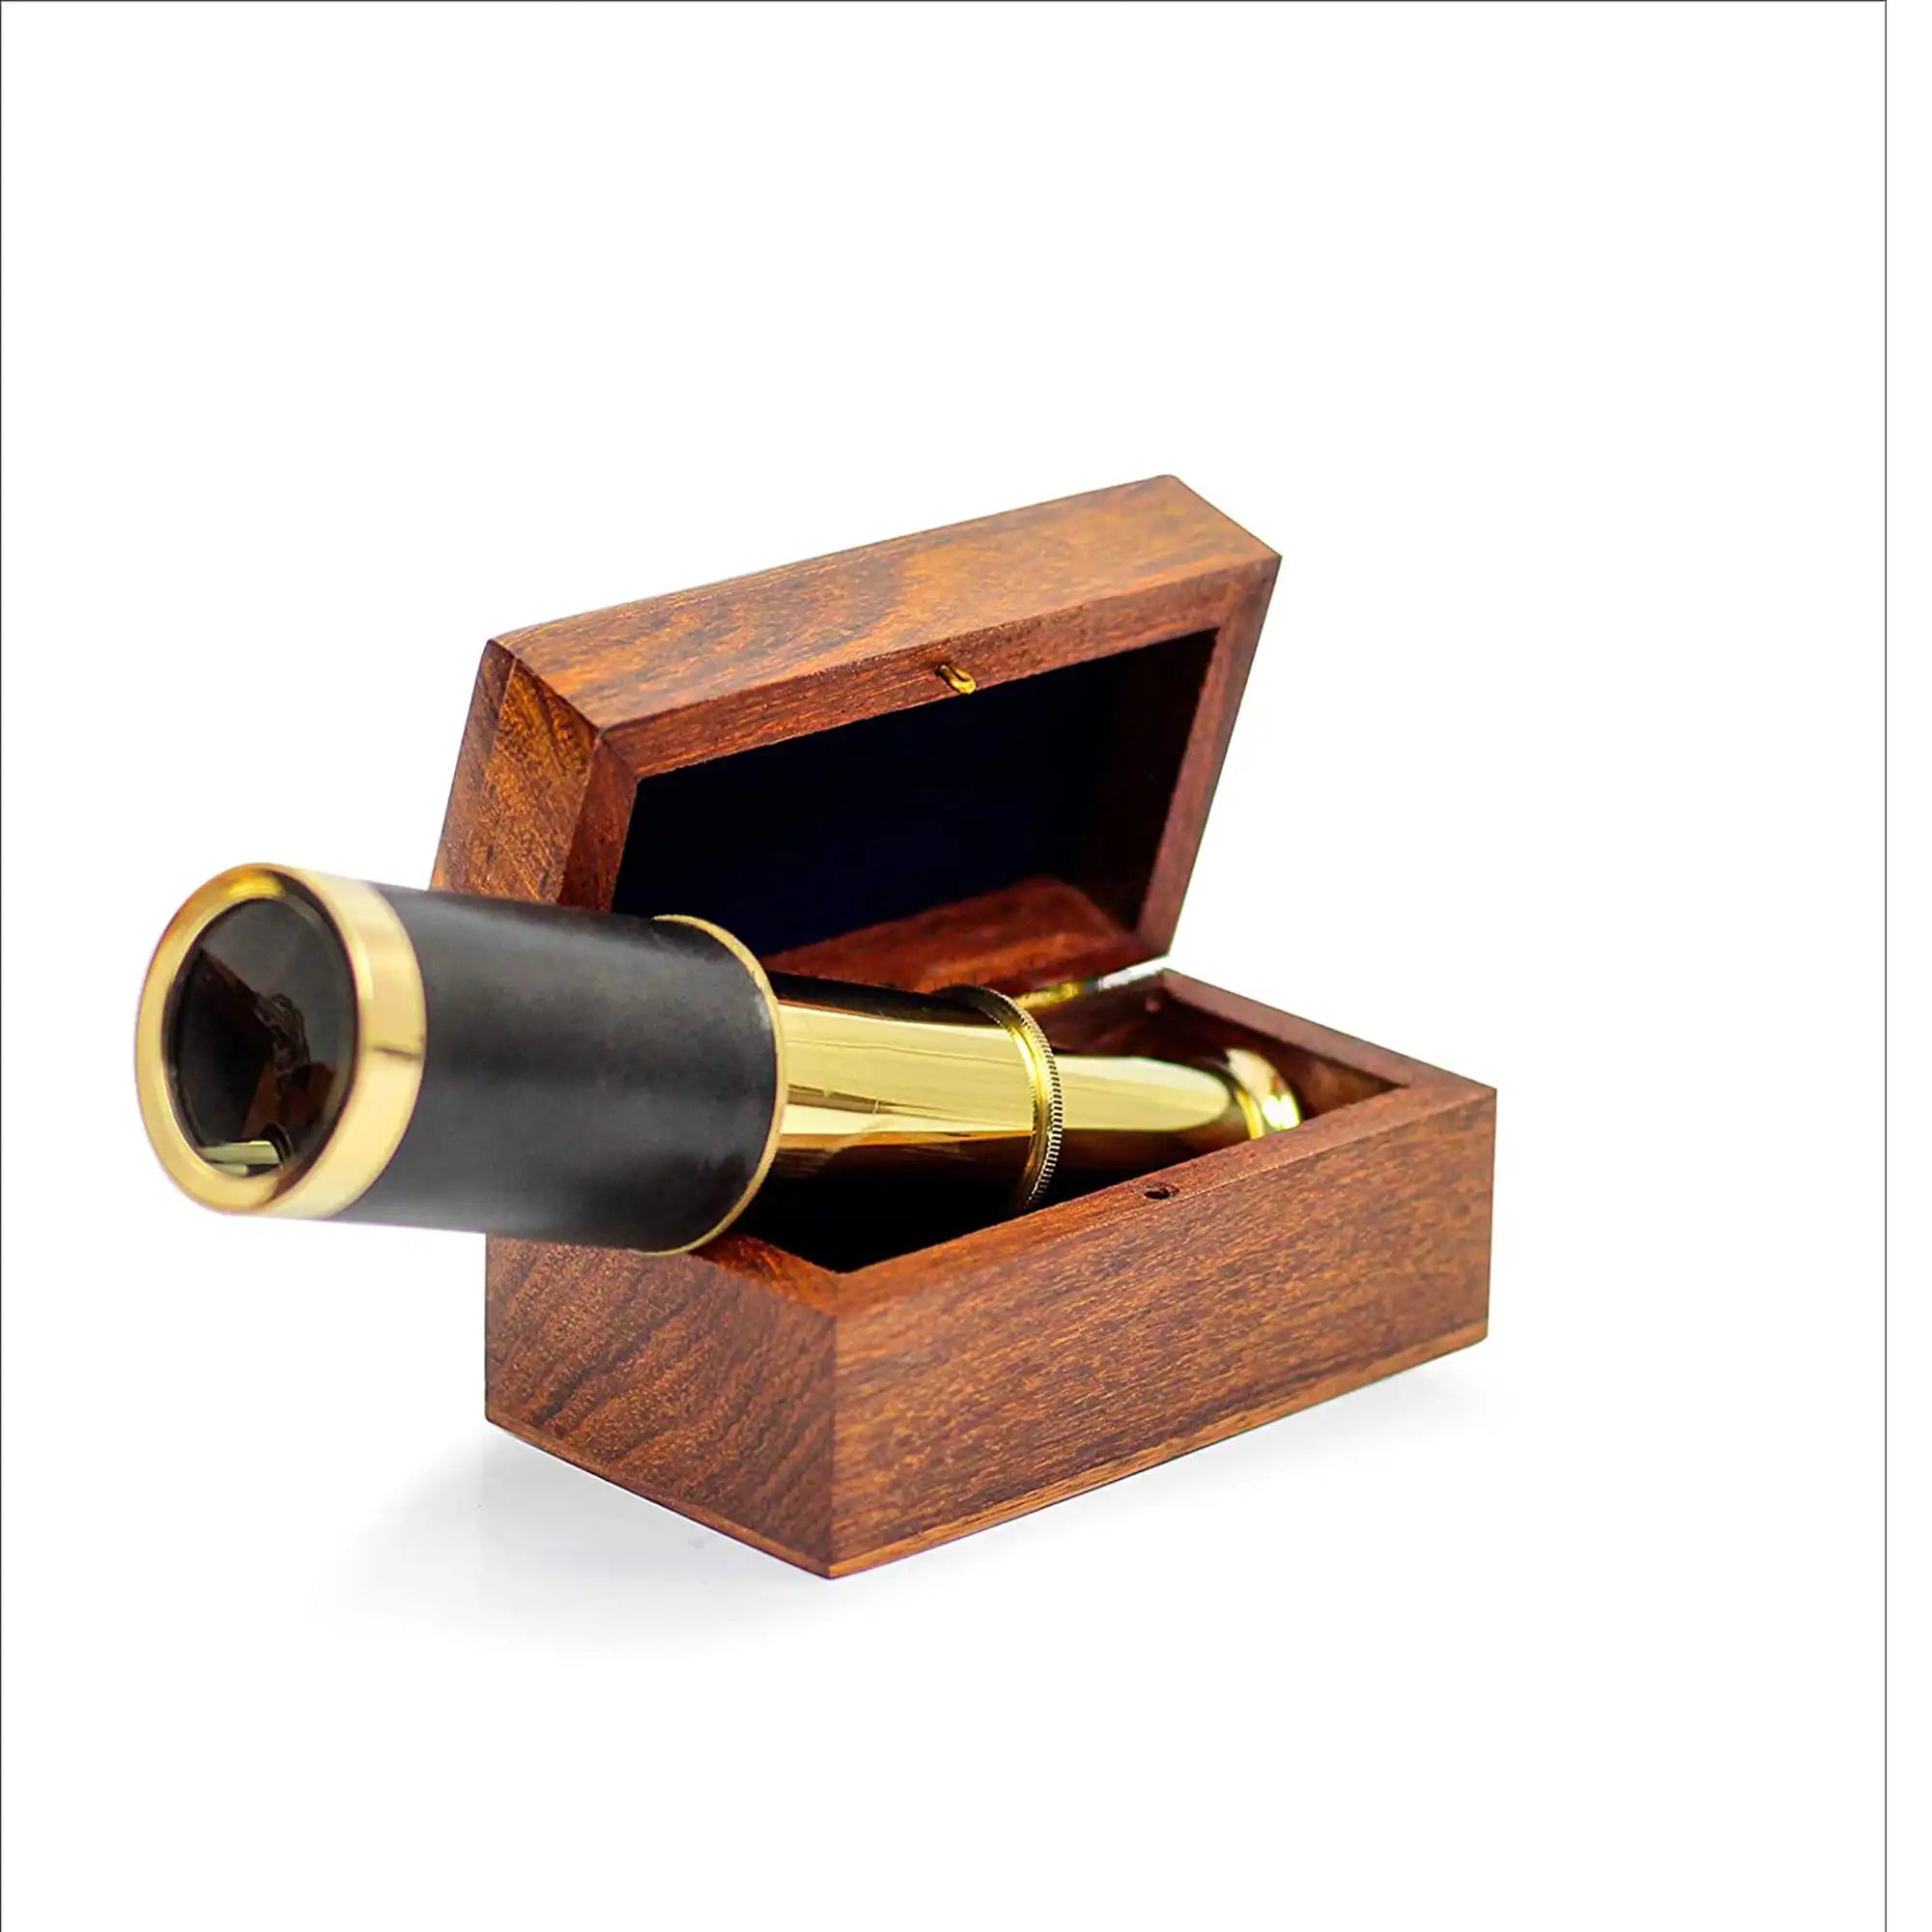 Miniature Beautiful Handcrafted Handheld Brass Telescope with Rosewood Box - Pirate Navigation Gifts -Portho mall (6 Inches, Polished Brass)